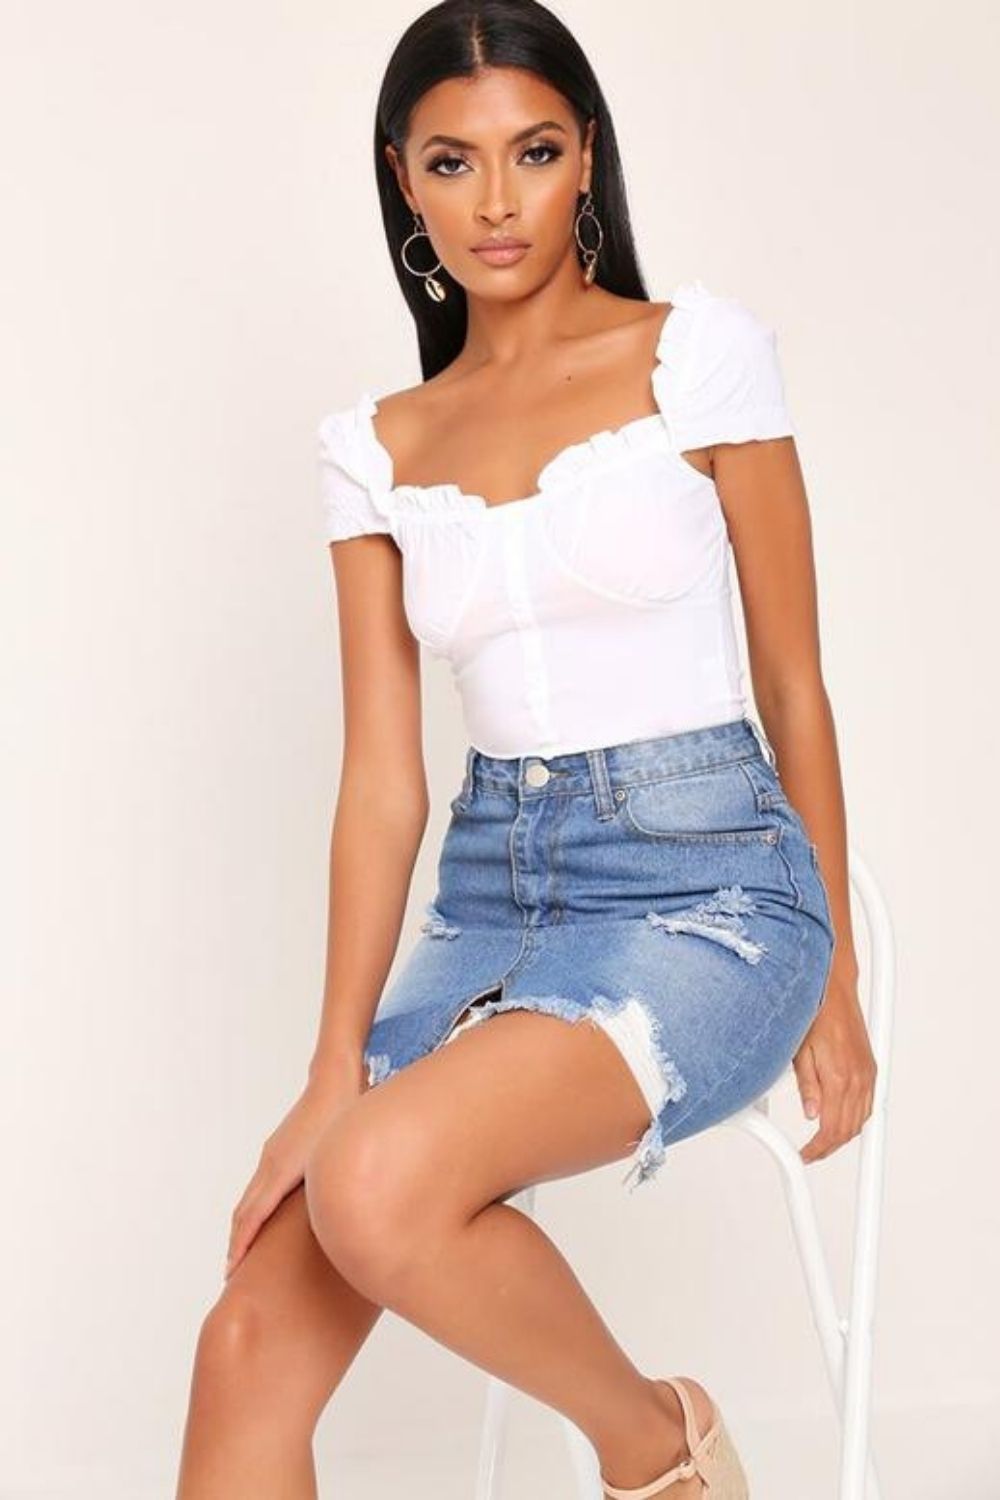 Sweetheart neckline halter neck top – Styched Fashion